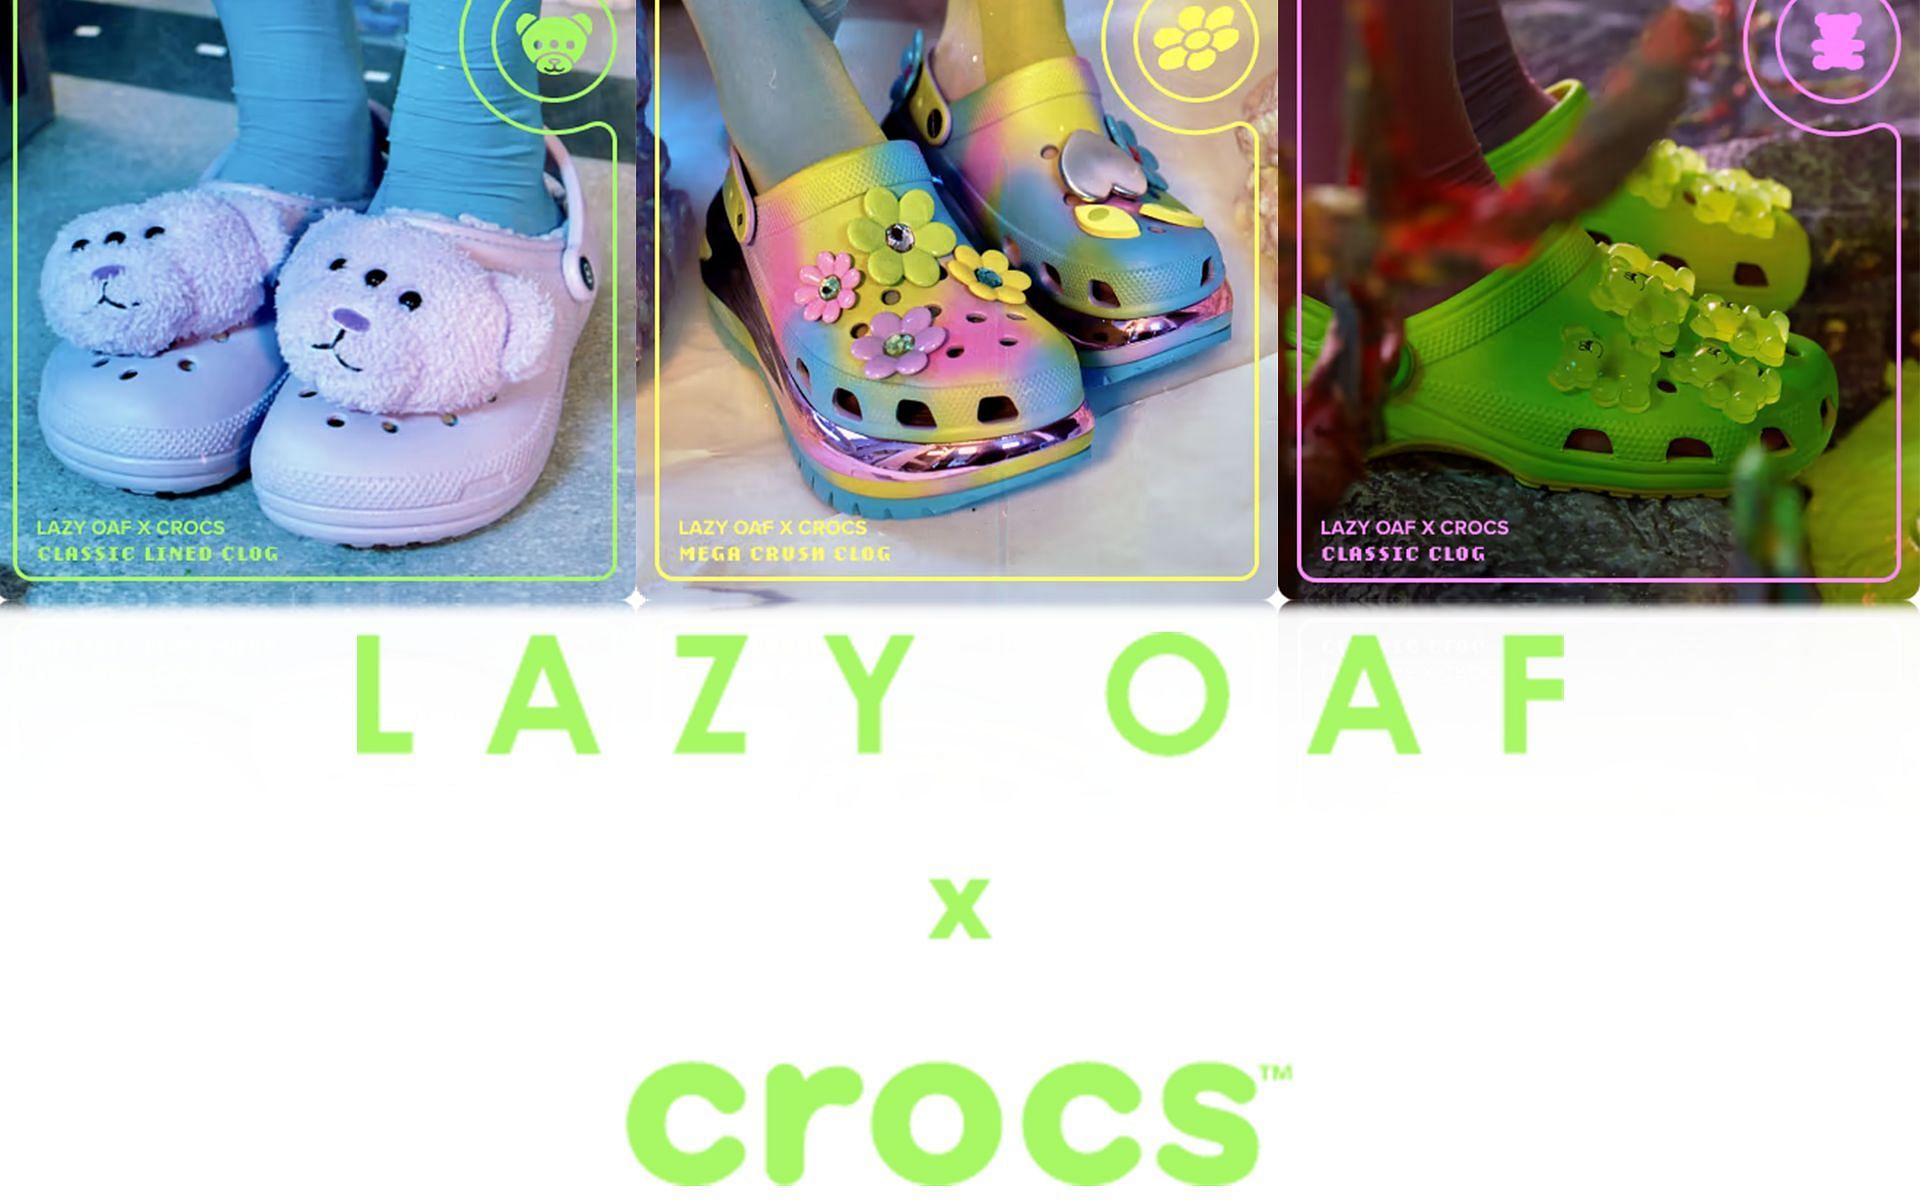 The upcoming Crocs x Lazy Oaf limited-edition collection (Image via Crocs)